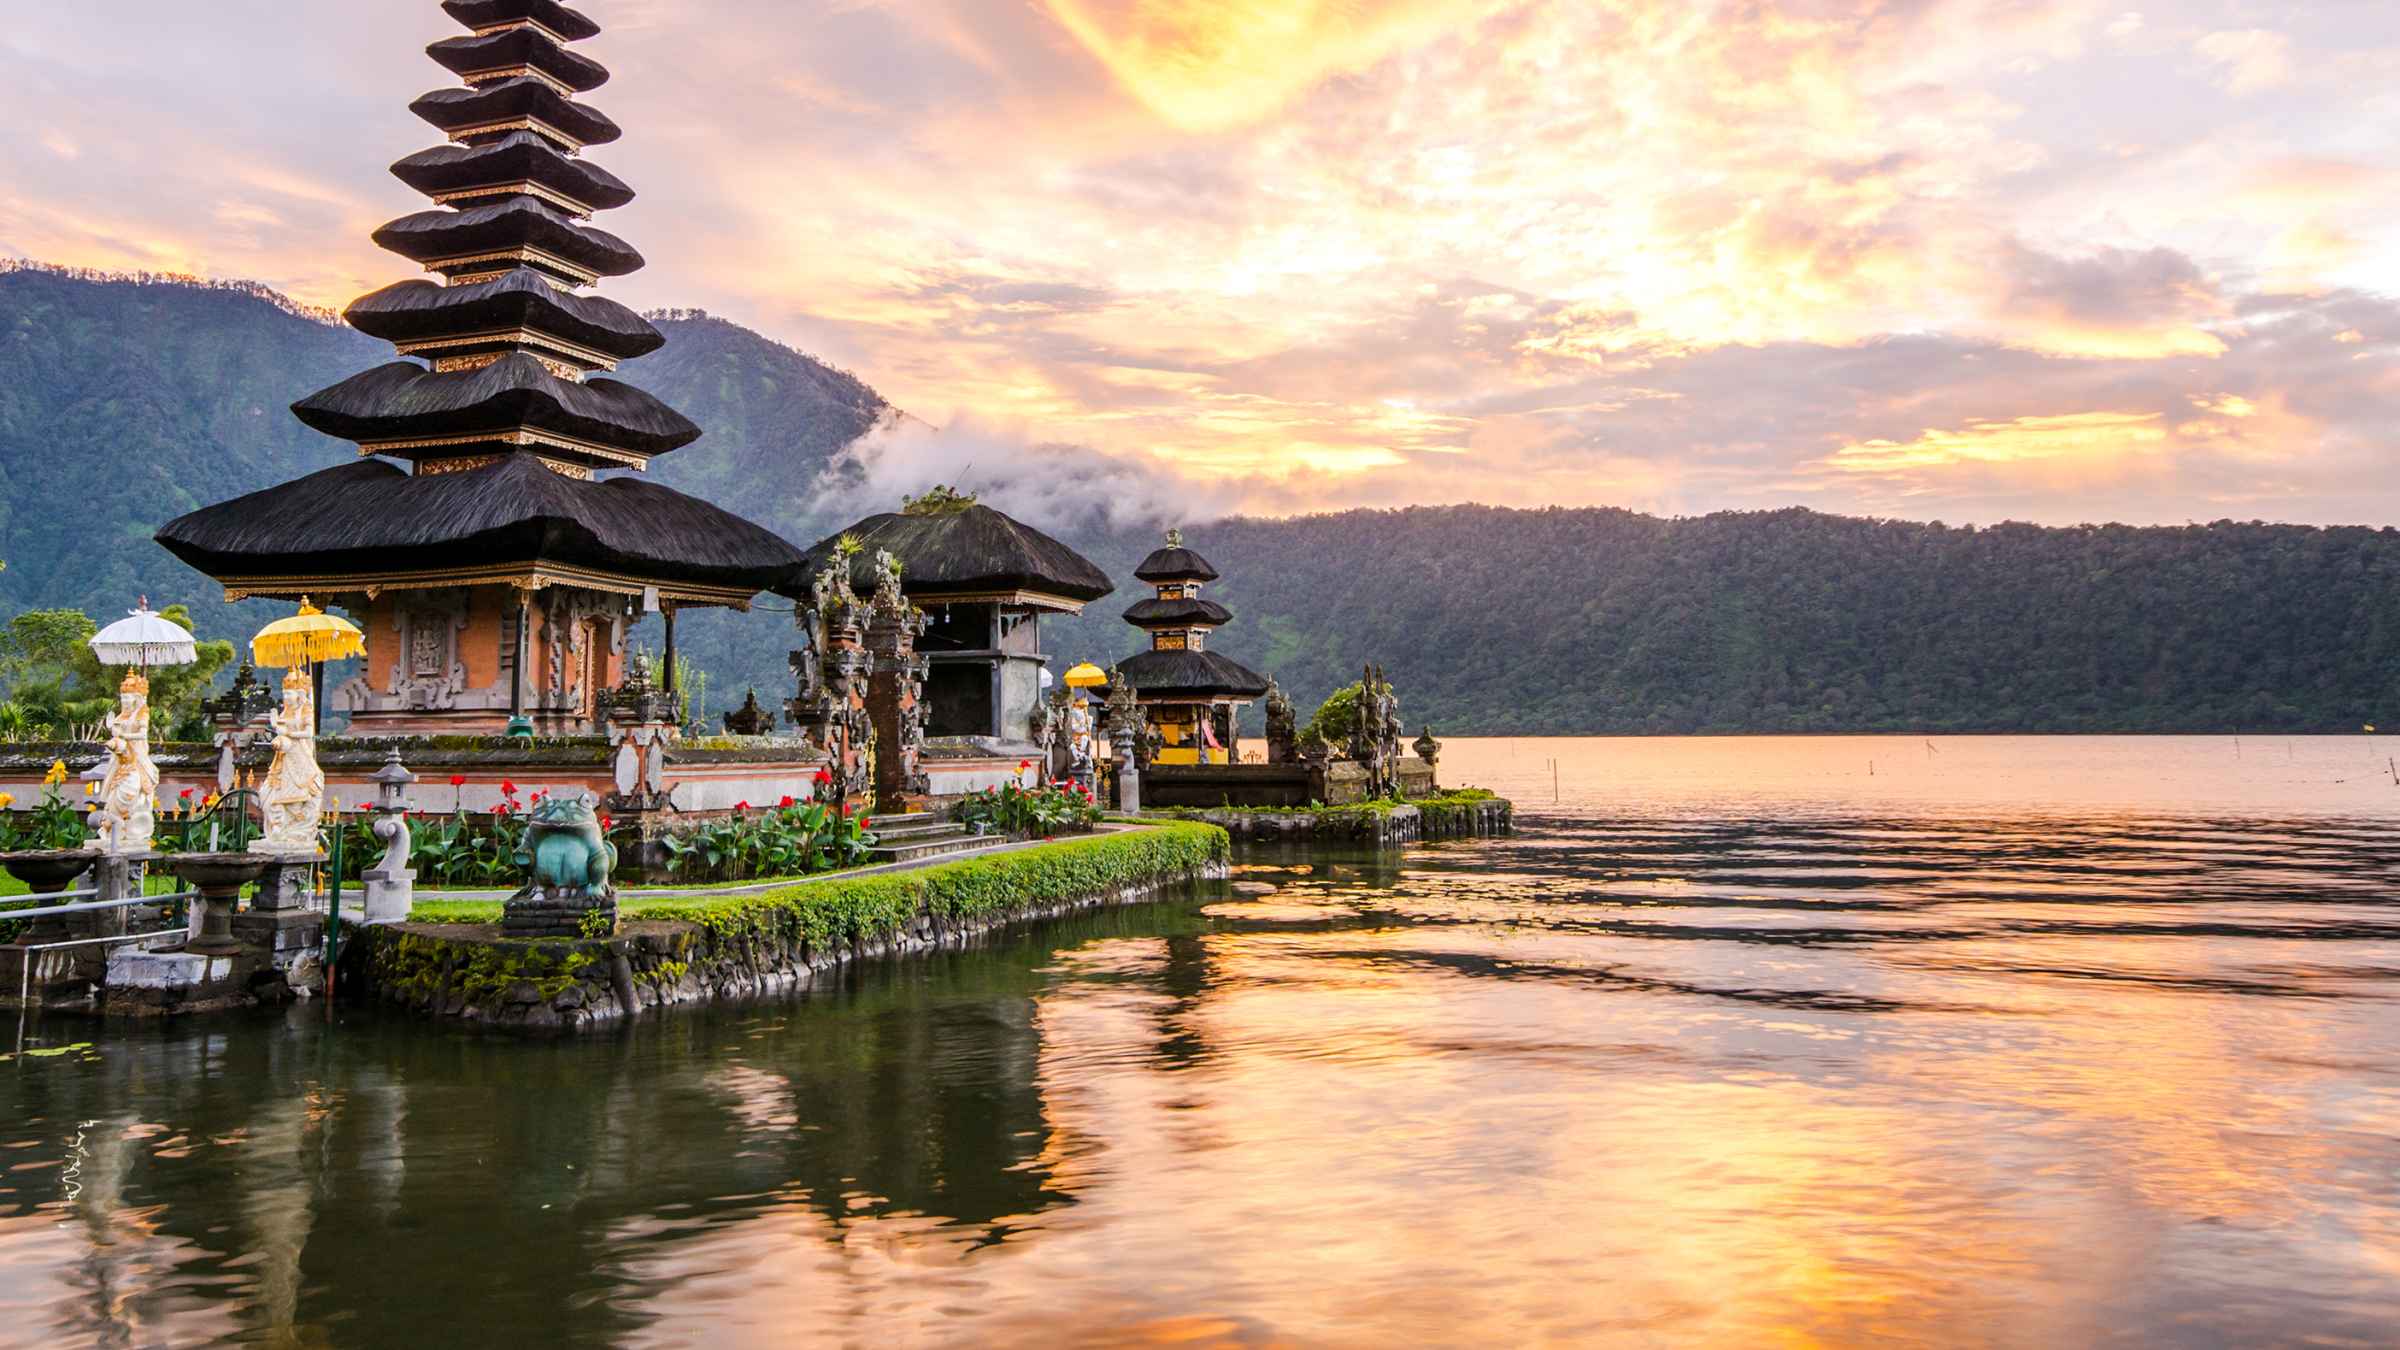 The BEST Bali Tours and Things to Do in 2022 - FREE Cancellation